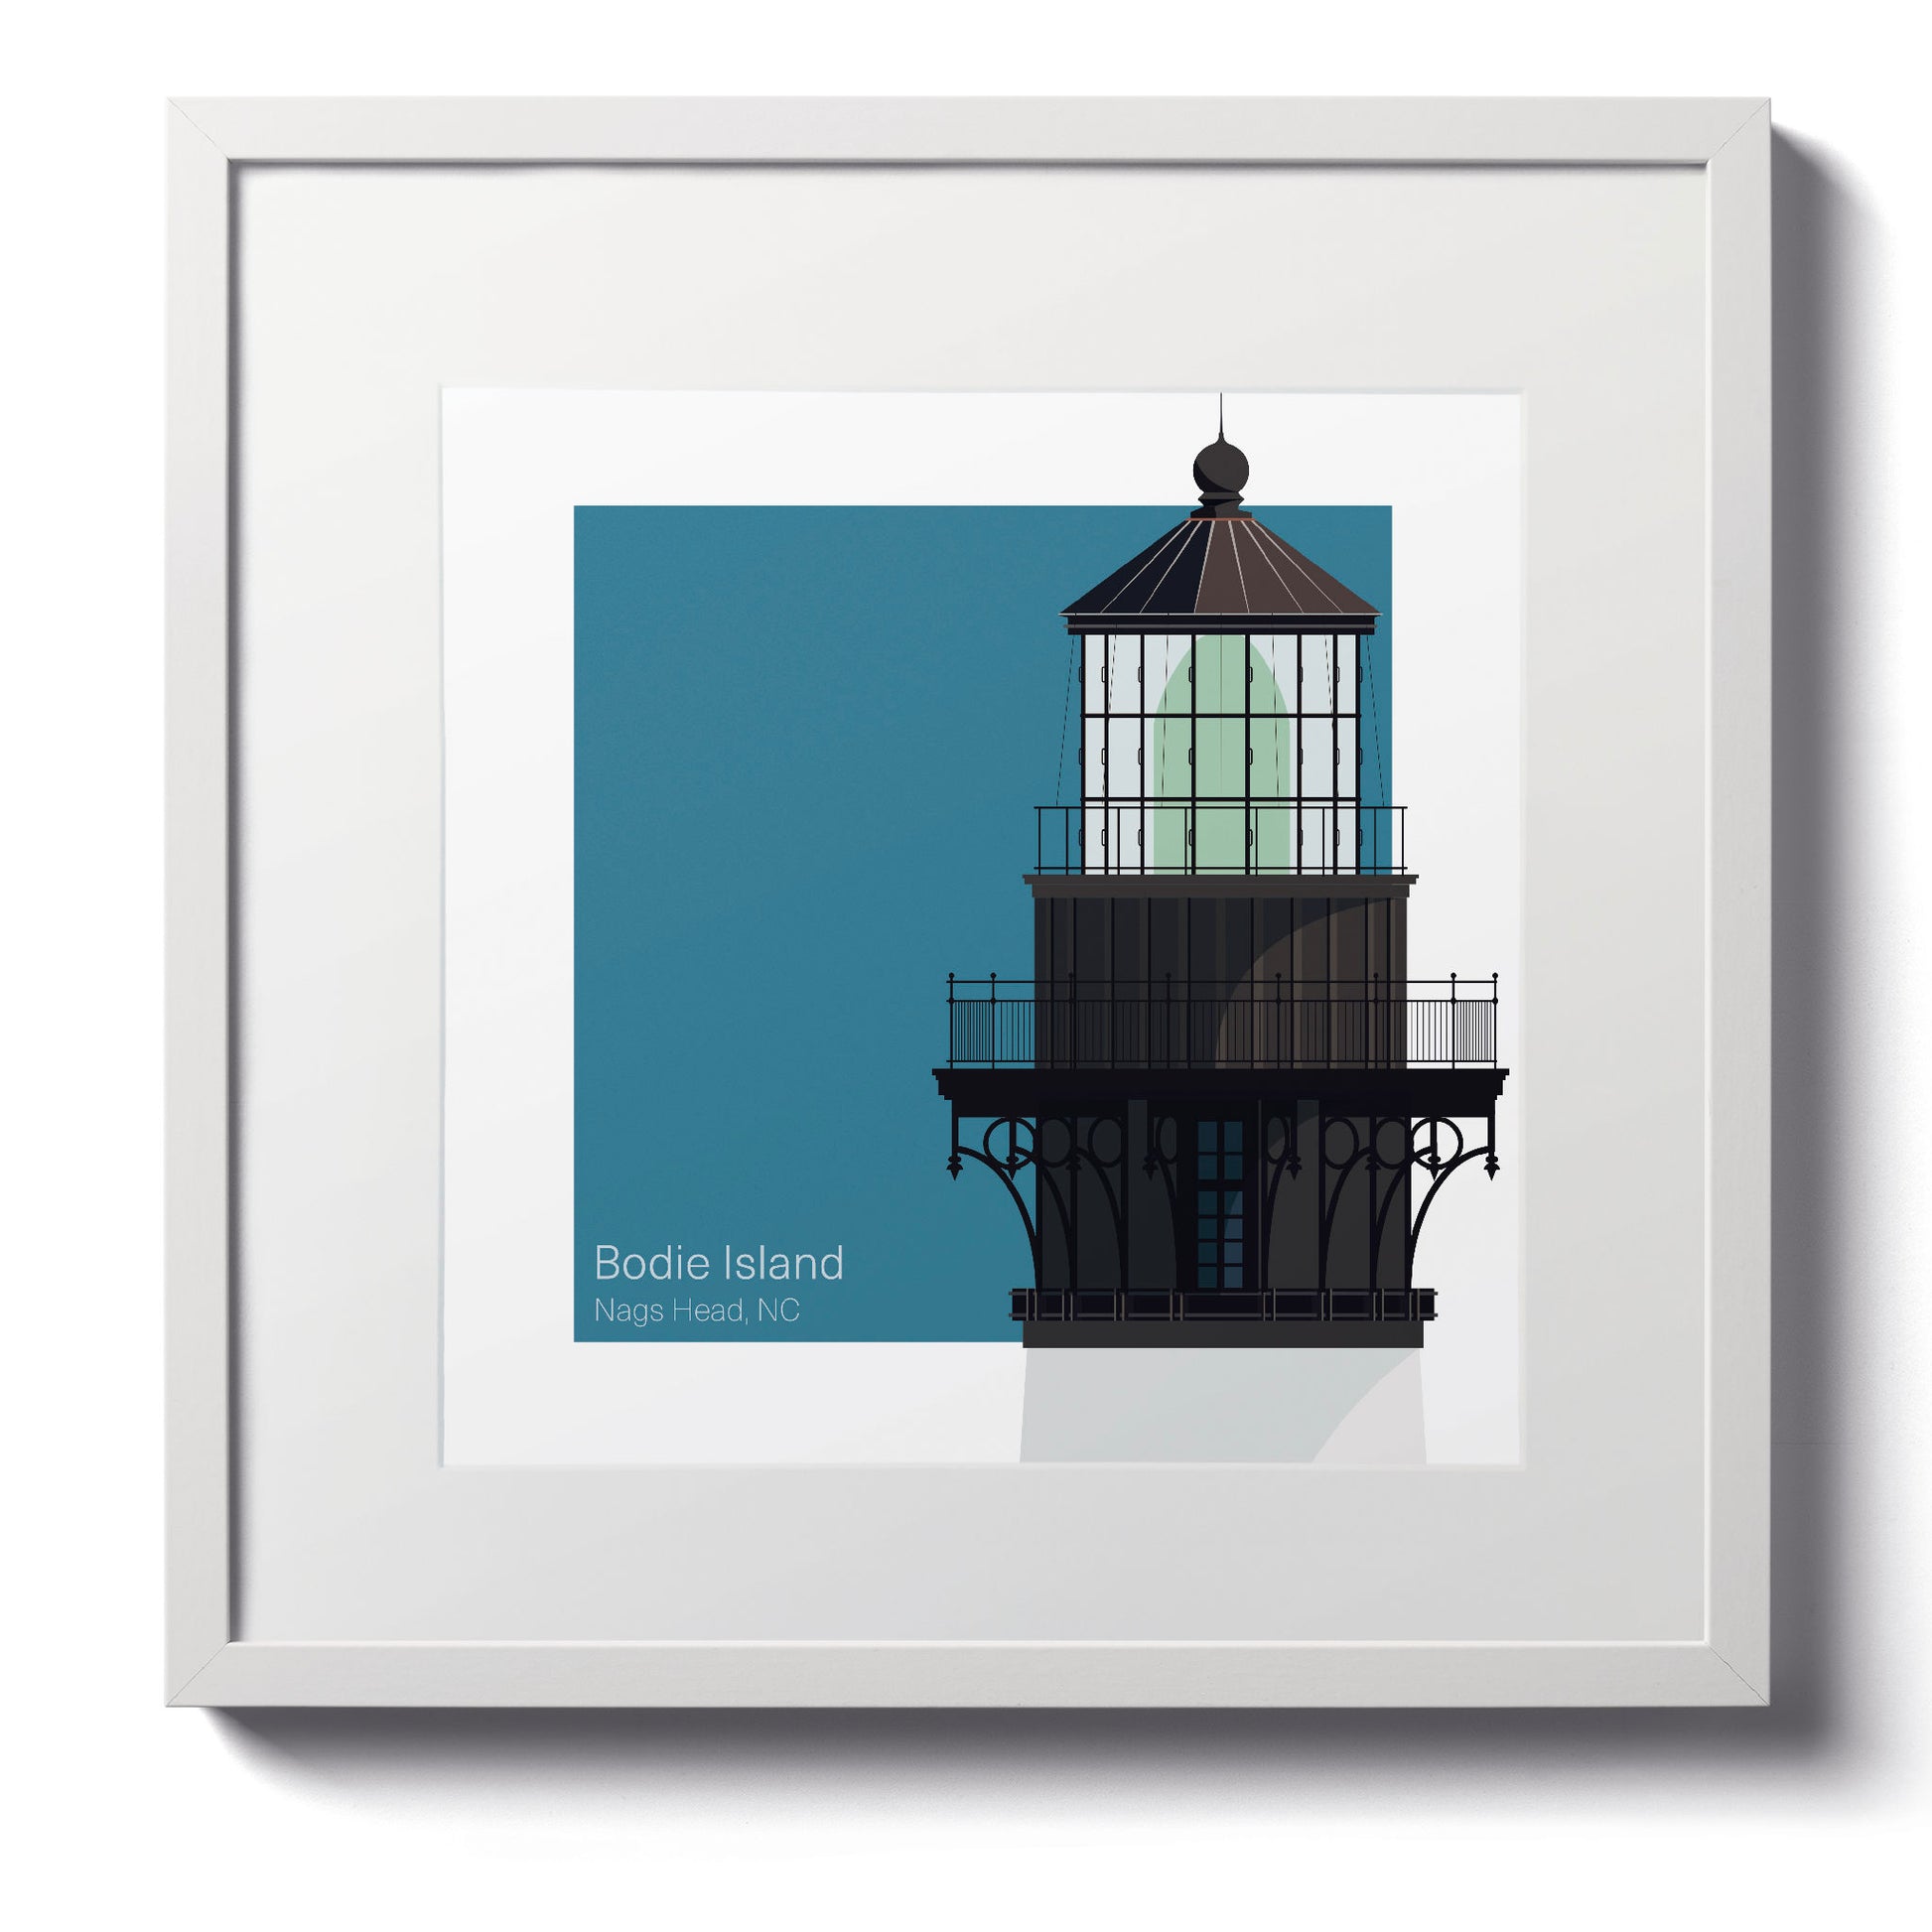 Illustration of the Bodie Island lighthouse, NC, USA. On a white background with aqua blue square as a backdrop., in a white frame  and measuring 12"x12" (30x30cm).